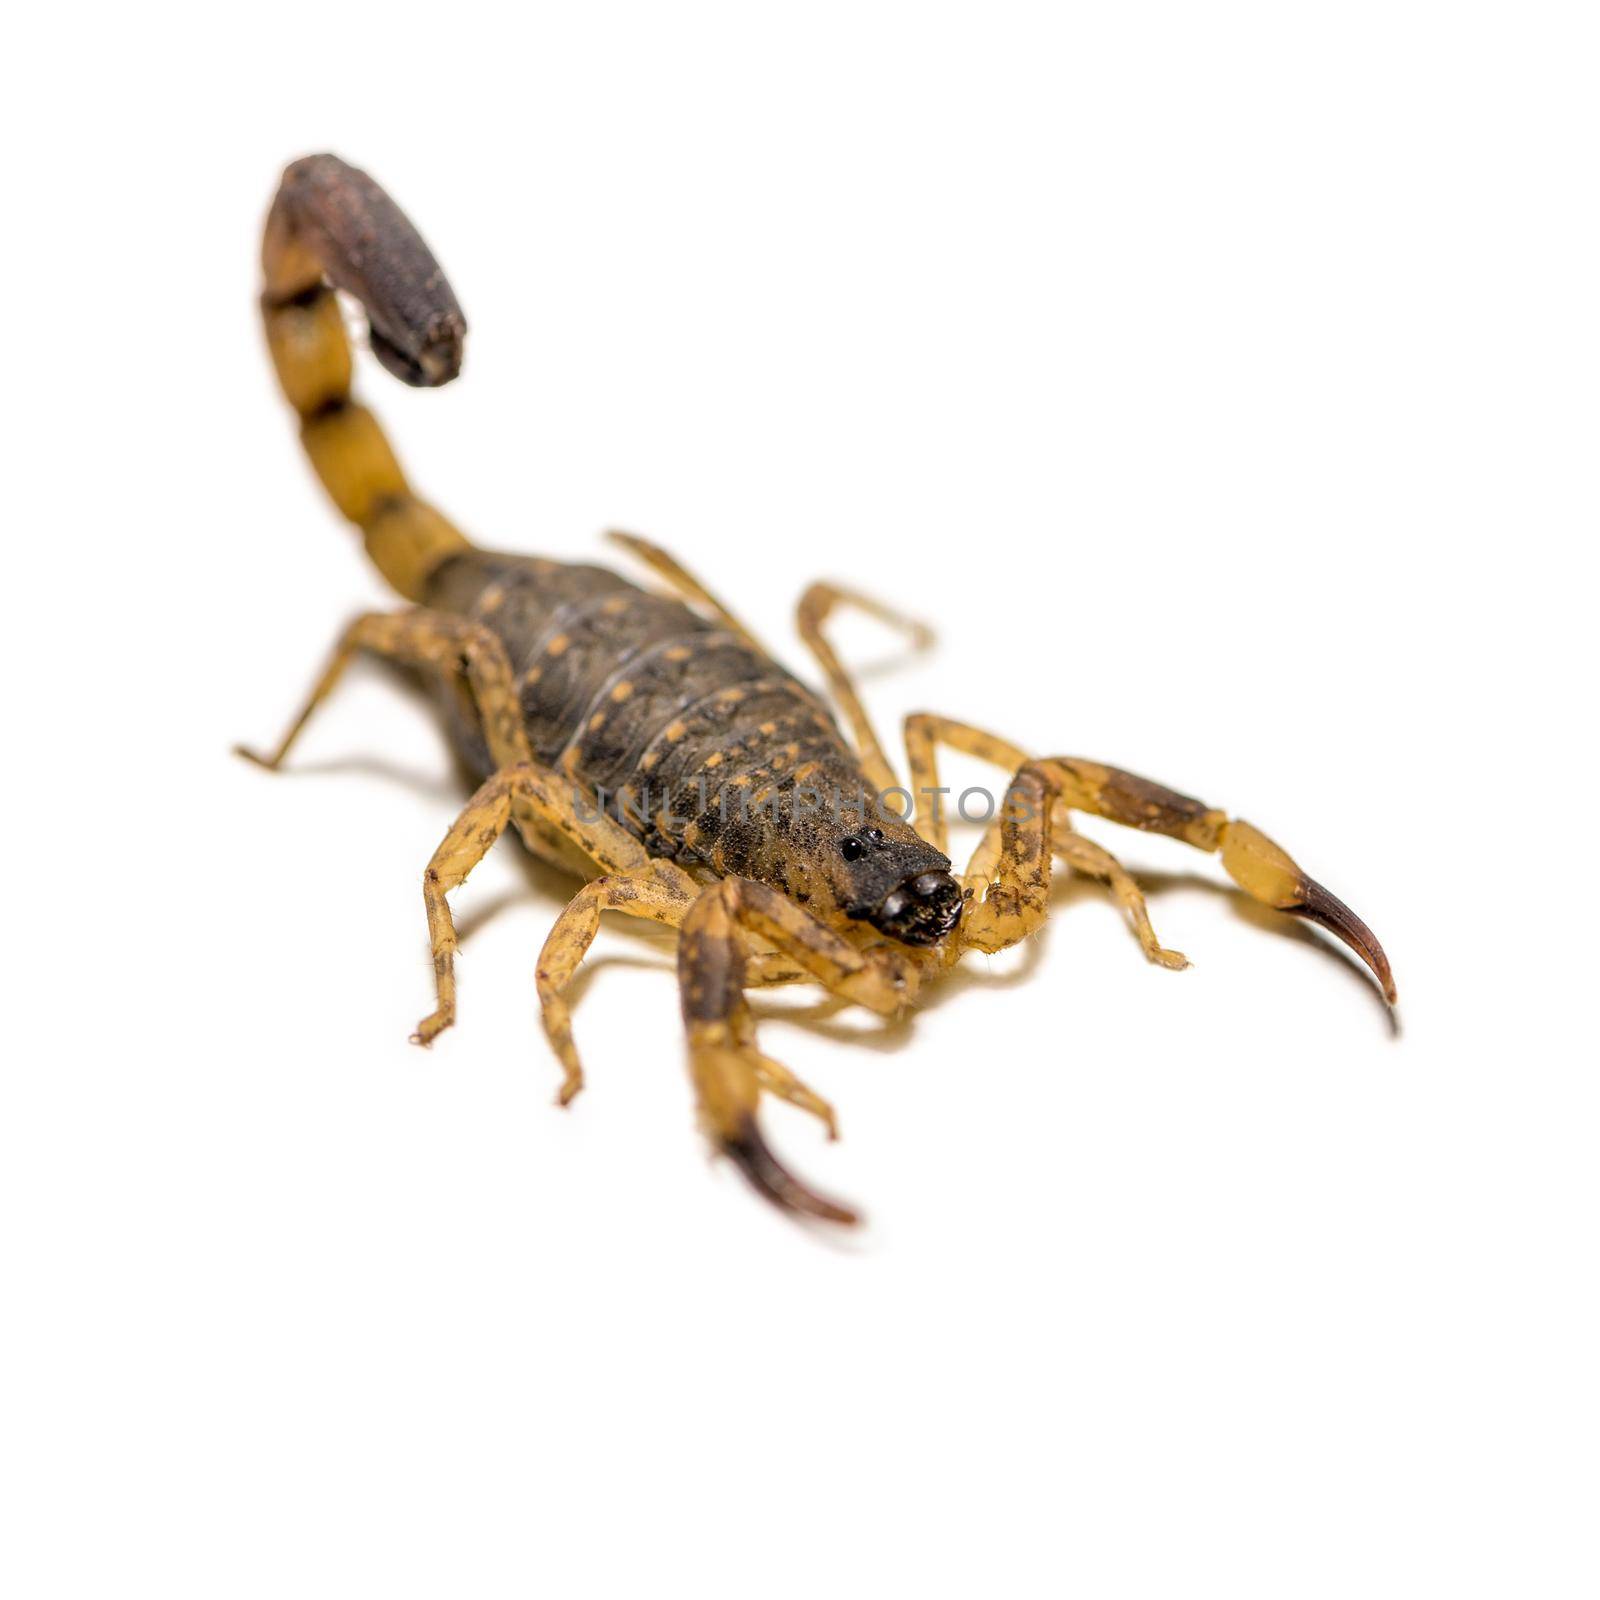 
Close up macro yellow or brown Scorpion in front on white background, Small animal is poisonous reptile in the tail for sting to hunt prey or self protection can be seen in the tropic